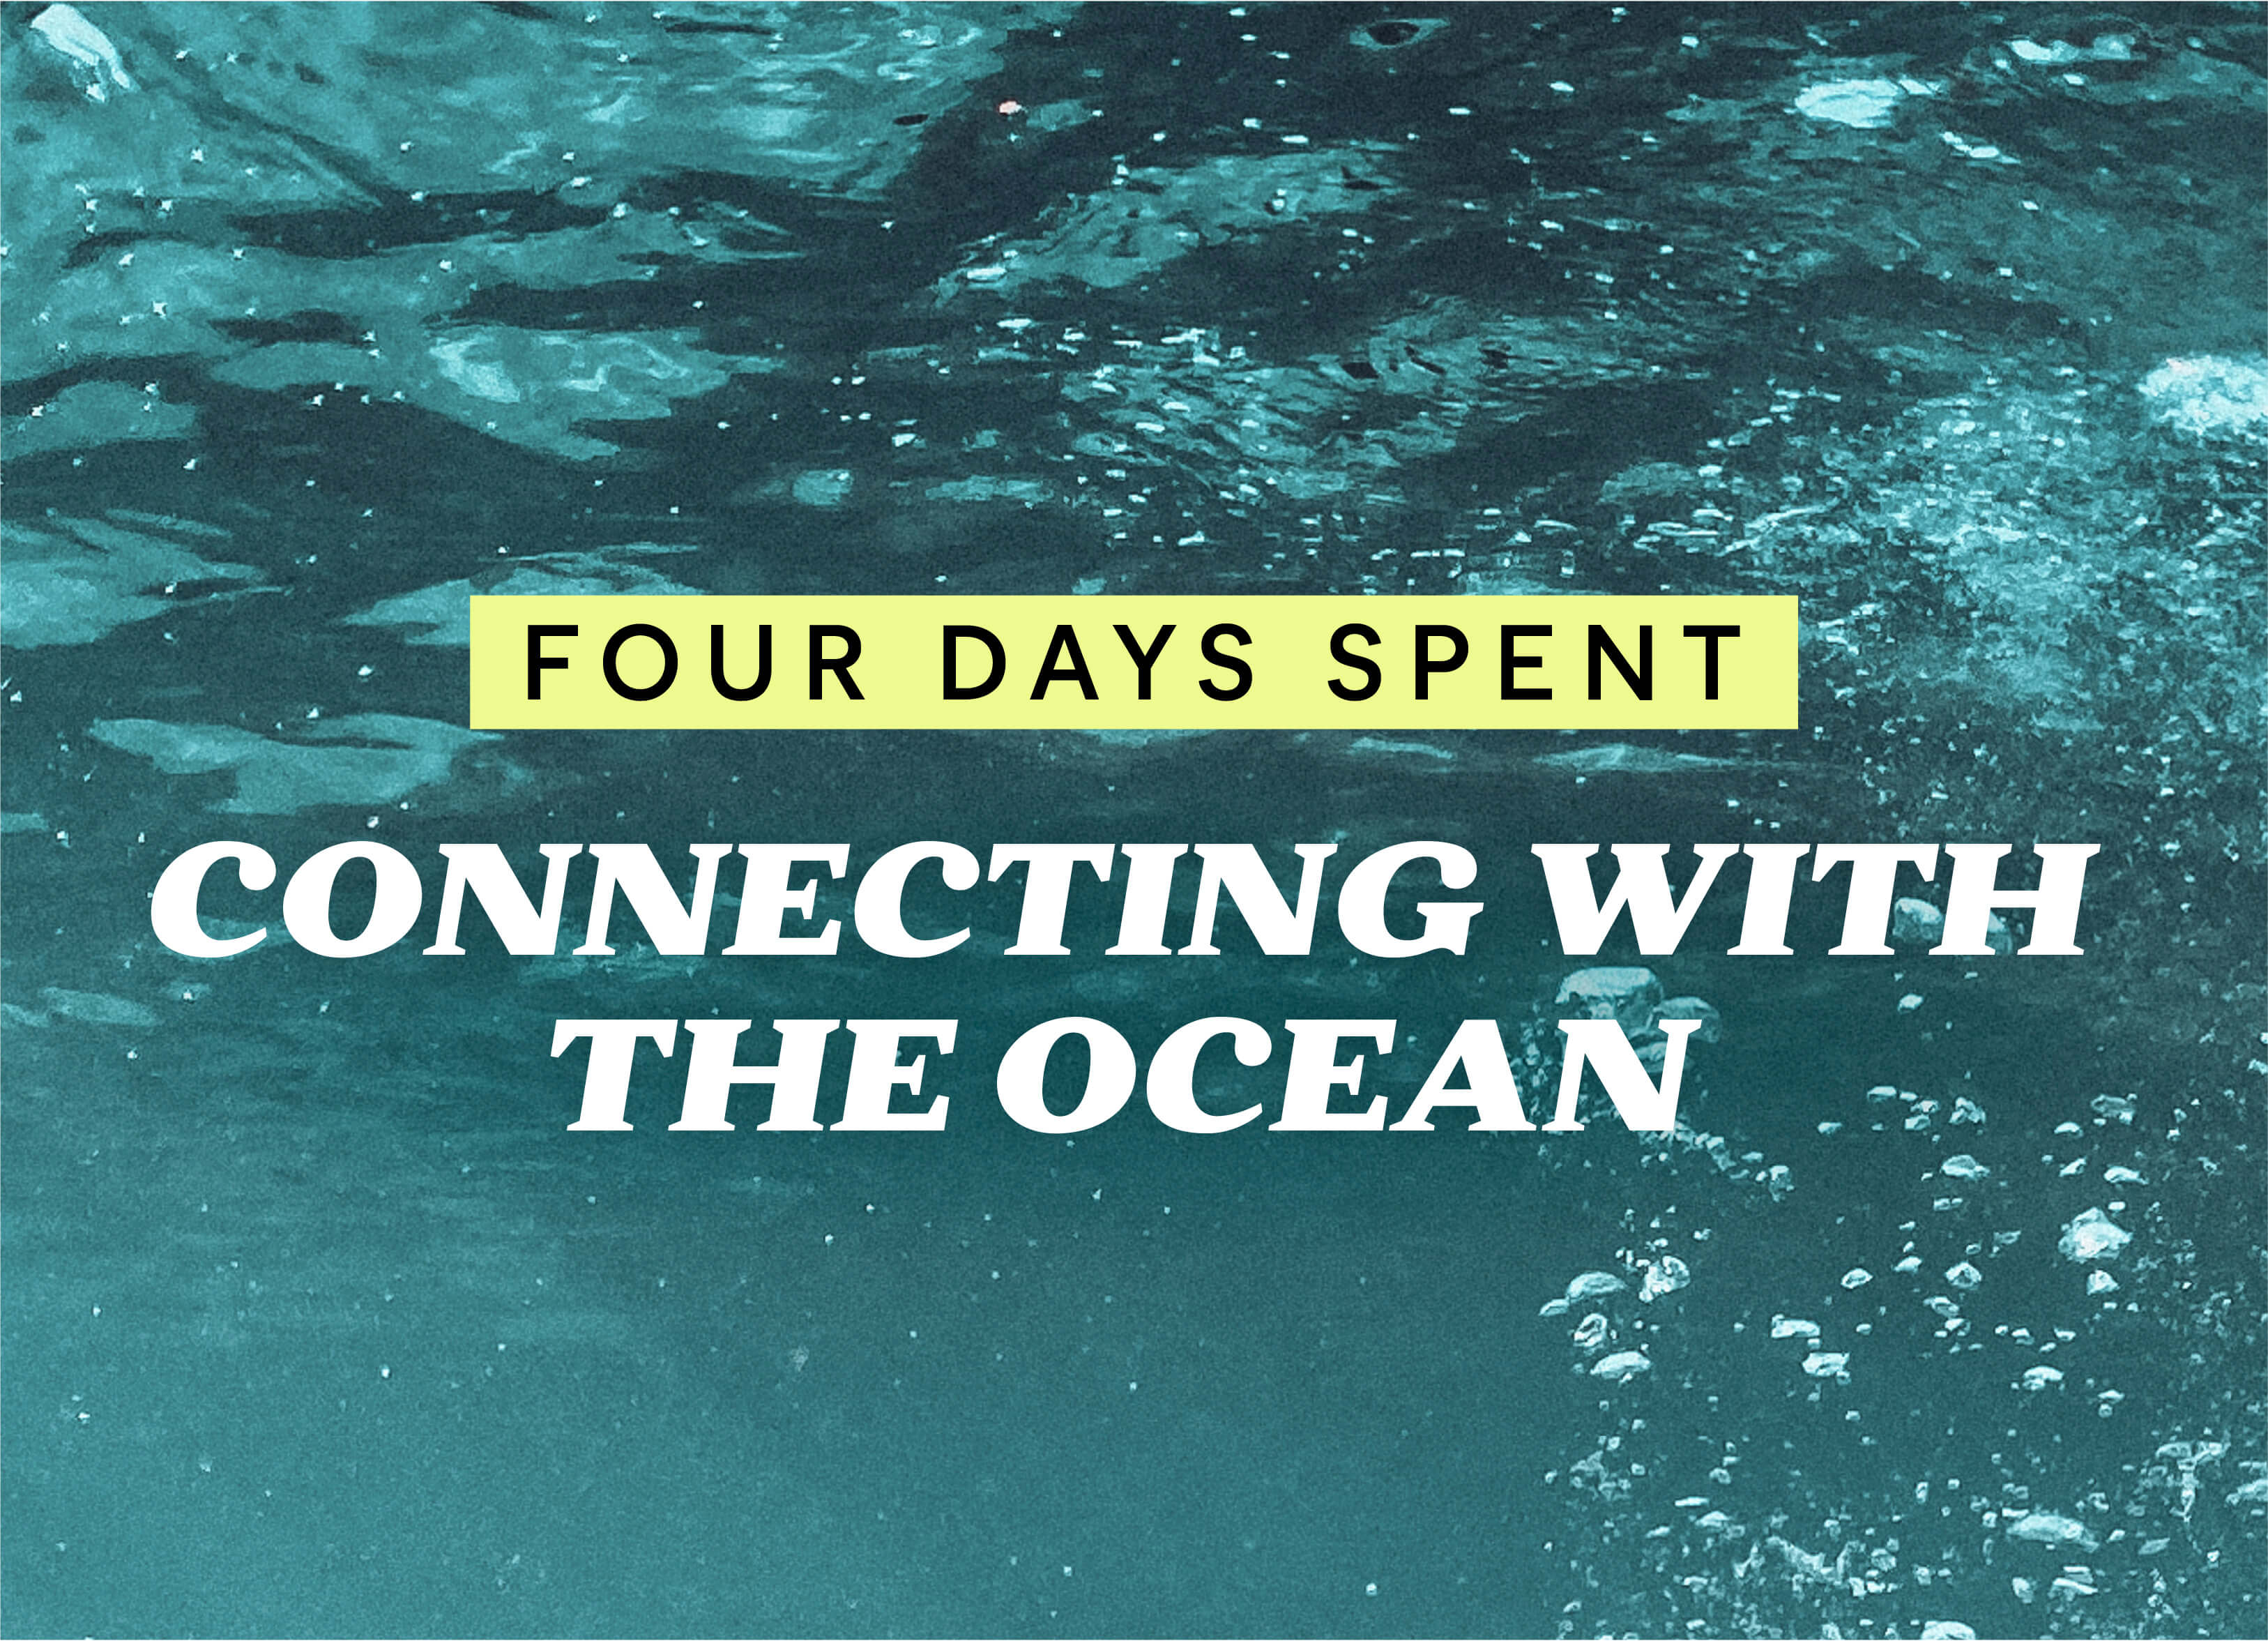 FOUR DAYS SPENT CONNECTING WITH THE OCEAN